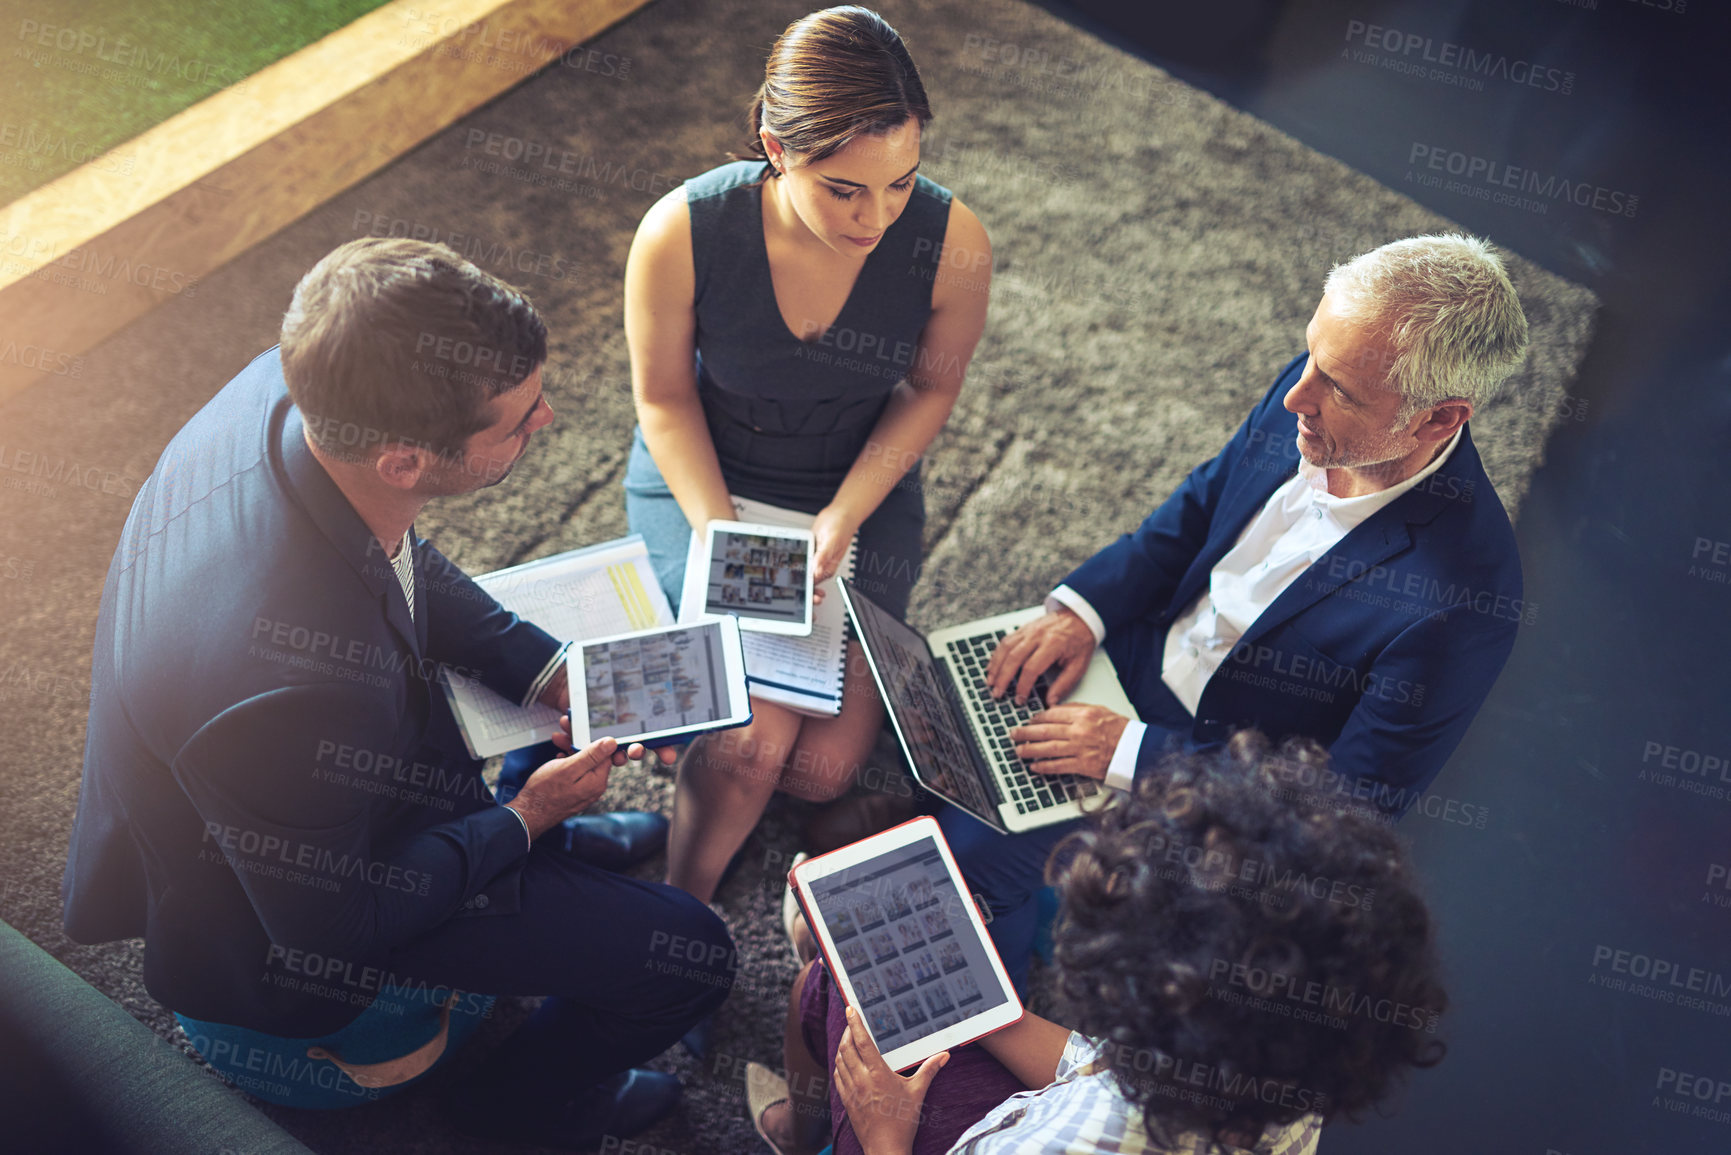 Buy stock photo High angle shot of a group of businesspeople using their digital tablets